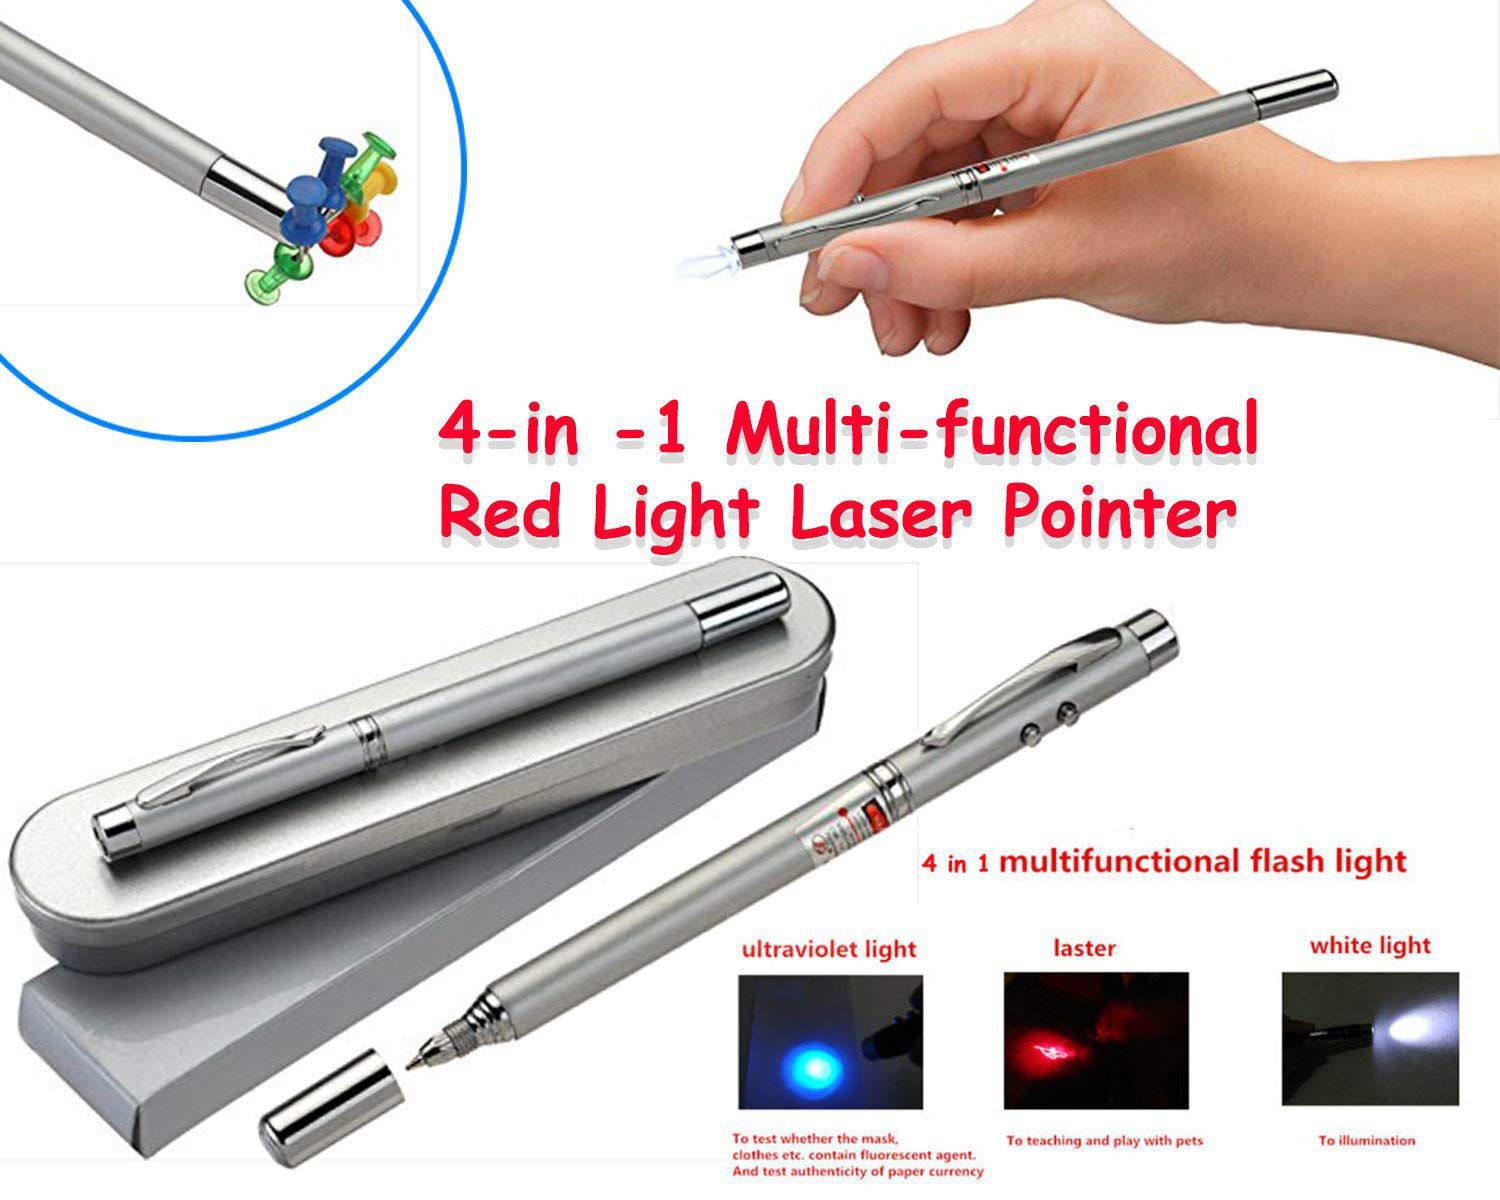     			Tuelip 5 In 1 Miltipurpose Antenna Pen with Led Light And Laser Pointer with Magnet